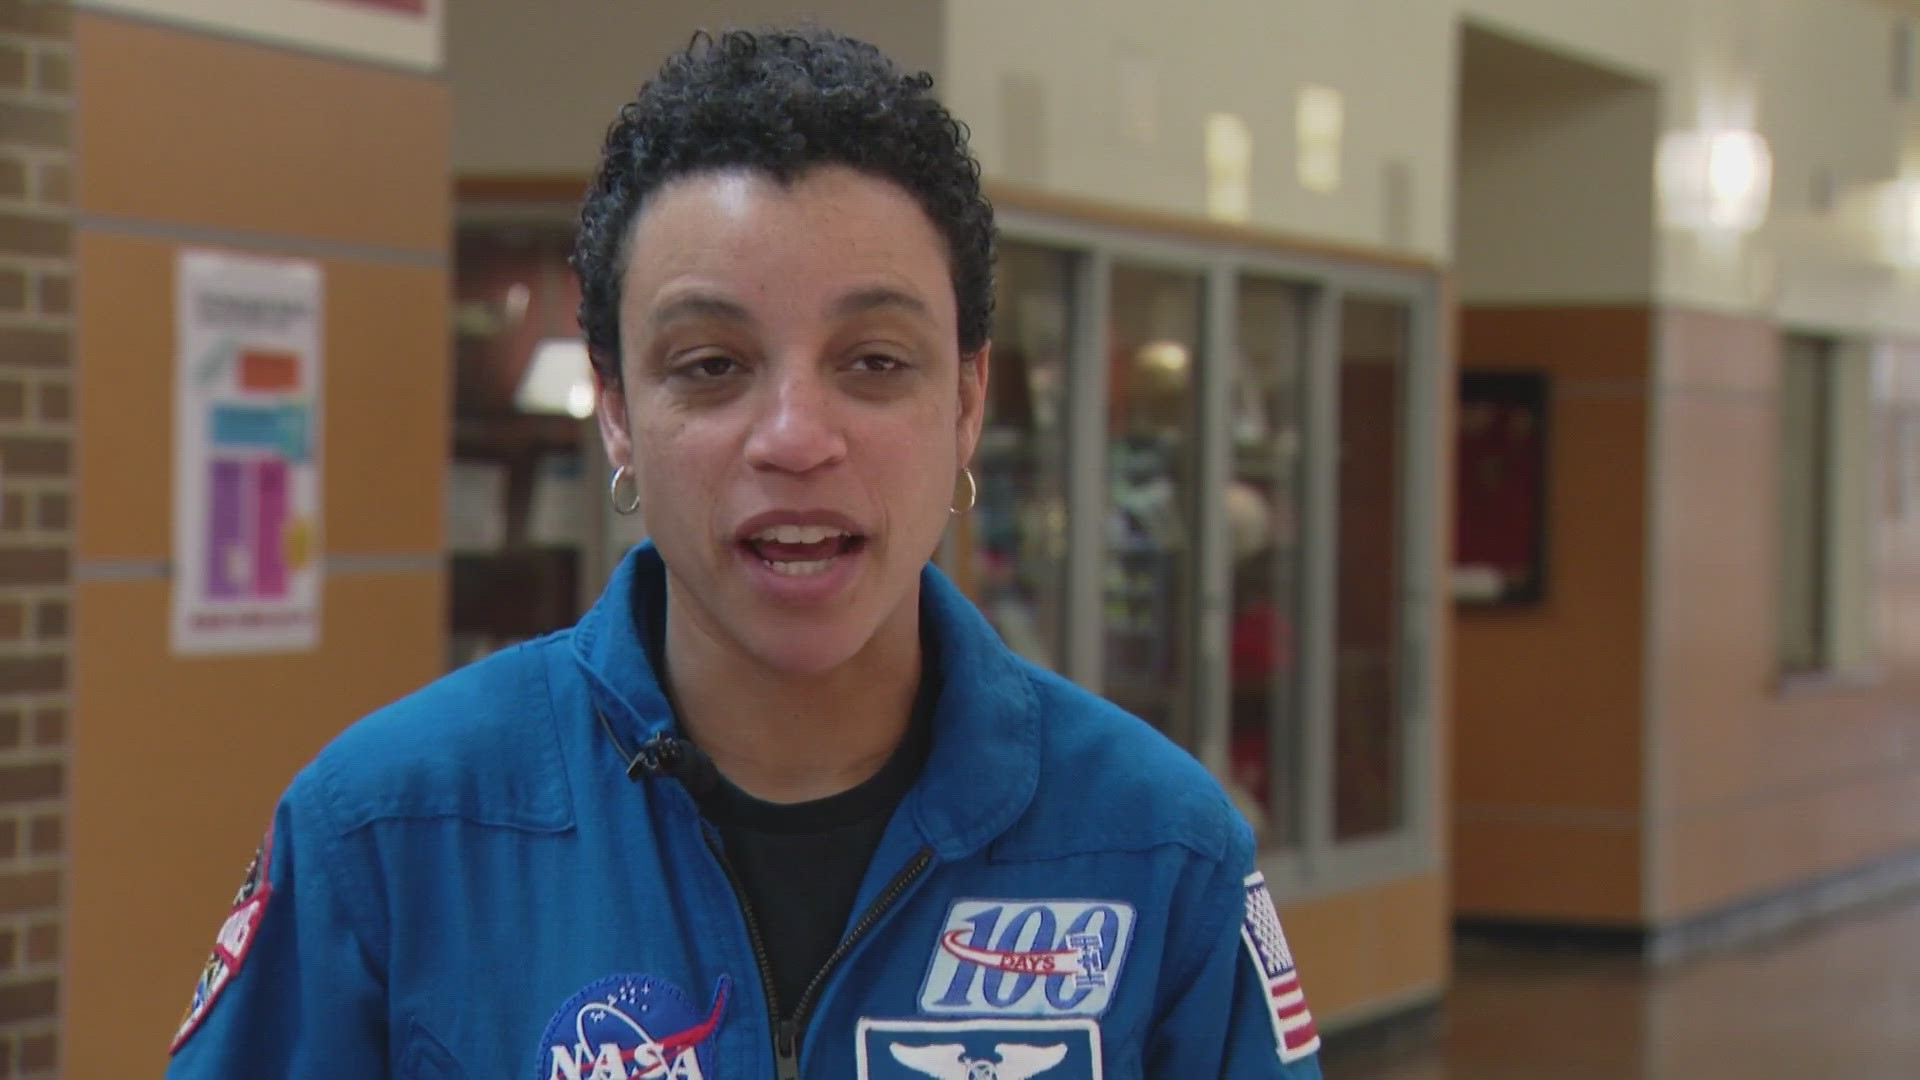 NASA Astronaut Jessica Watkins talked to her alma mater about what it was like being the first Black female to live and work on the International Space Station.